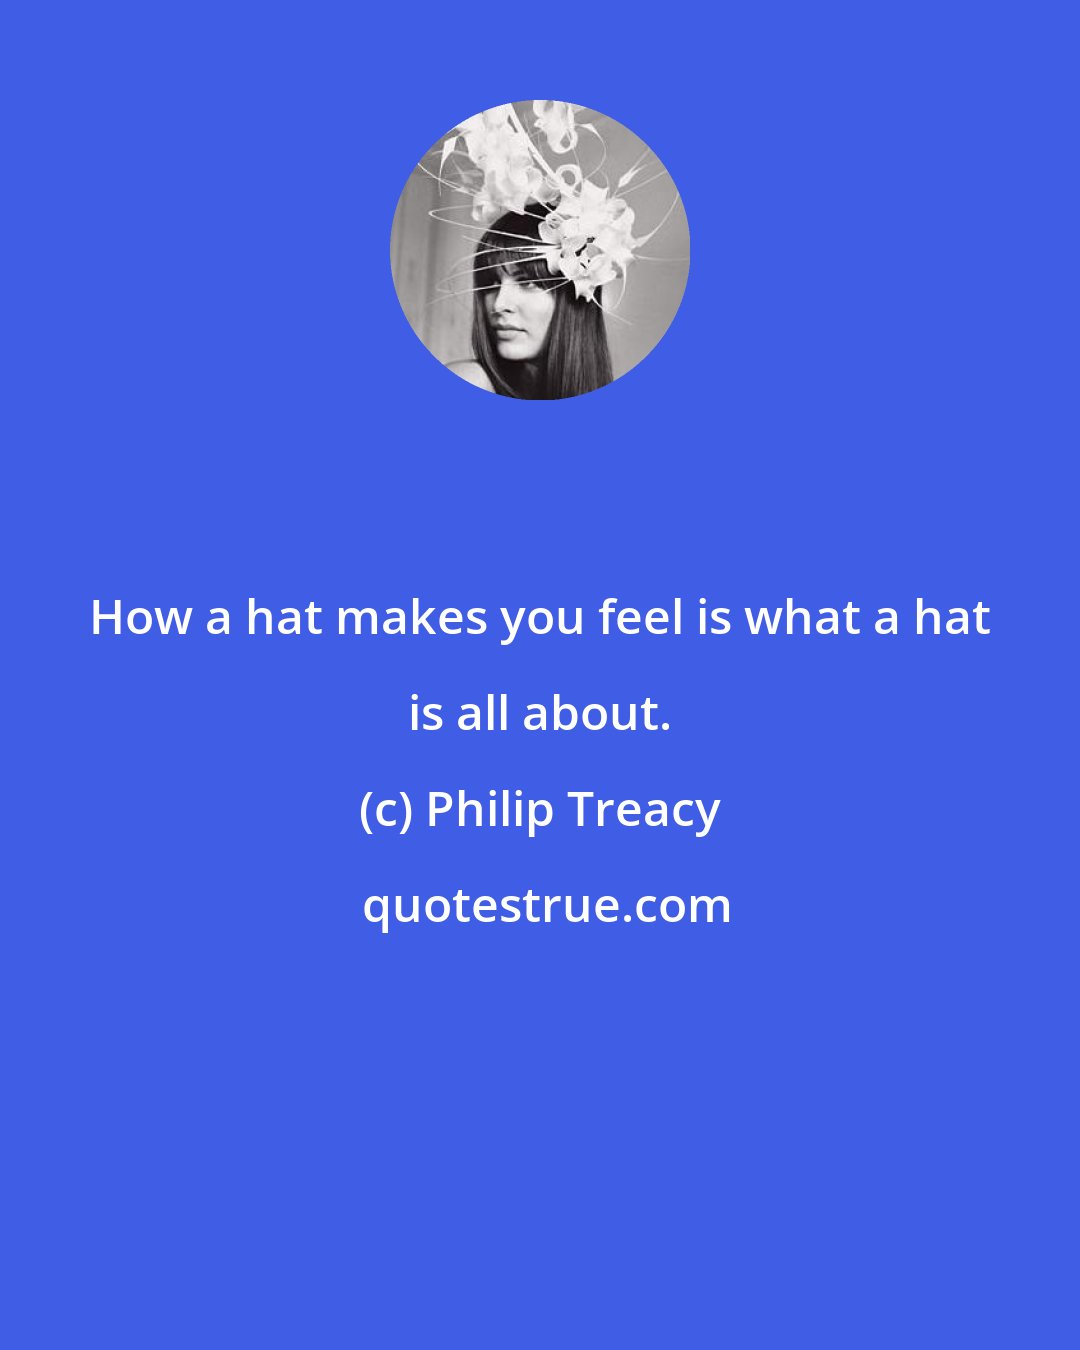 Philip Treacy: How a hat makes you feel is what a hat is all about.